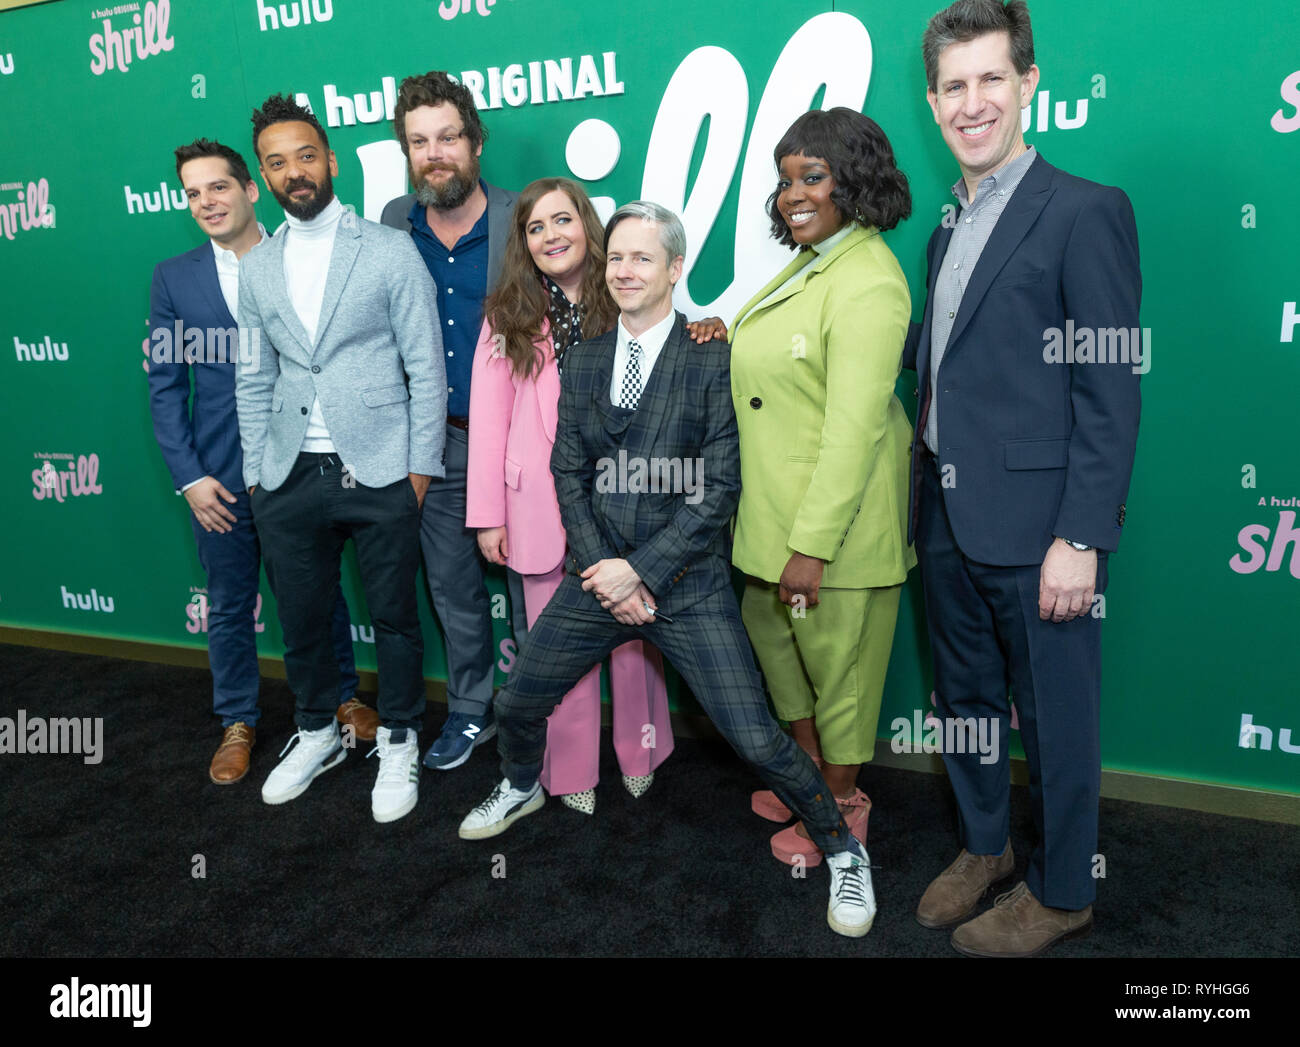 New York, United States. 13th Mar, 2019. New York, NY - March 13, 2019: Billy Rosenberg, Ian Owens, Luka Jones, Aidy Bryant, John Cameron Mitchell, Lolly Adefope, Craig Erwich attends New York Hulu Shrill premiere screening at Walter Reade Theater of Lincoln Center Credit: lev radin/Alamy Live News Stock Photo